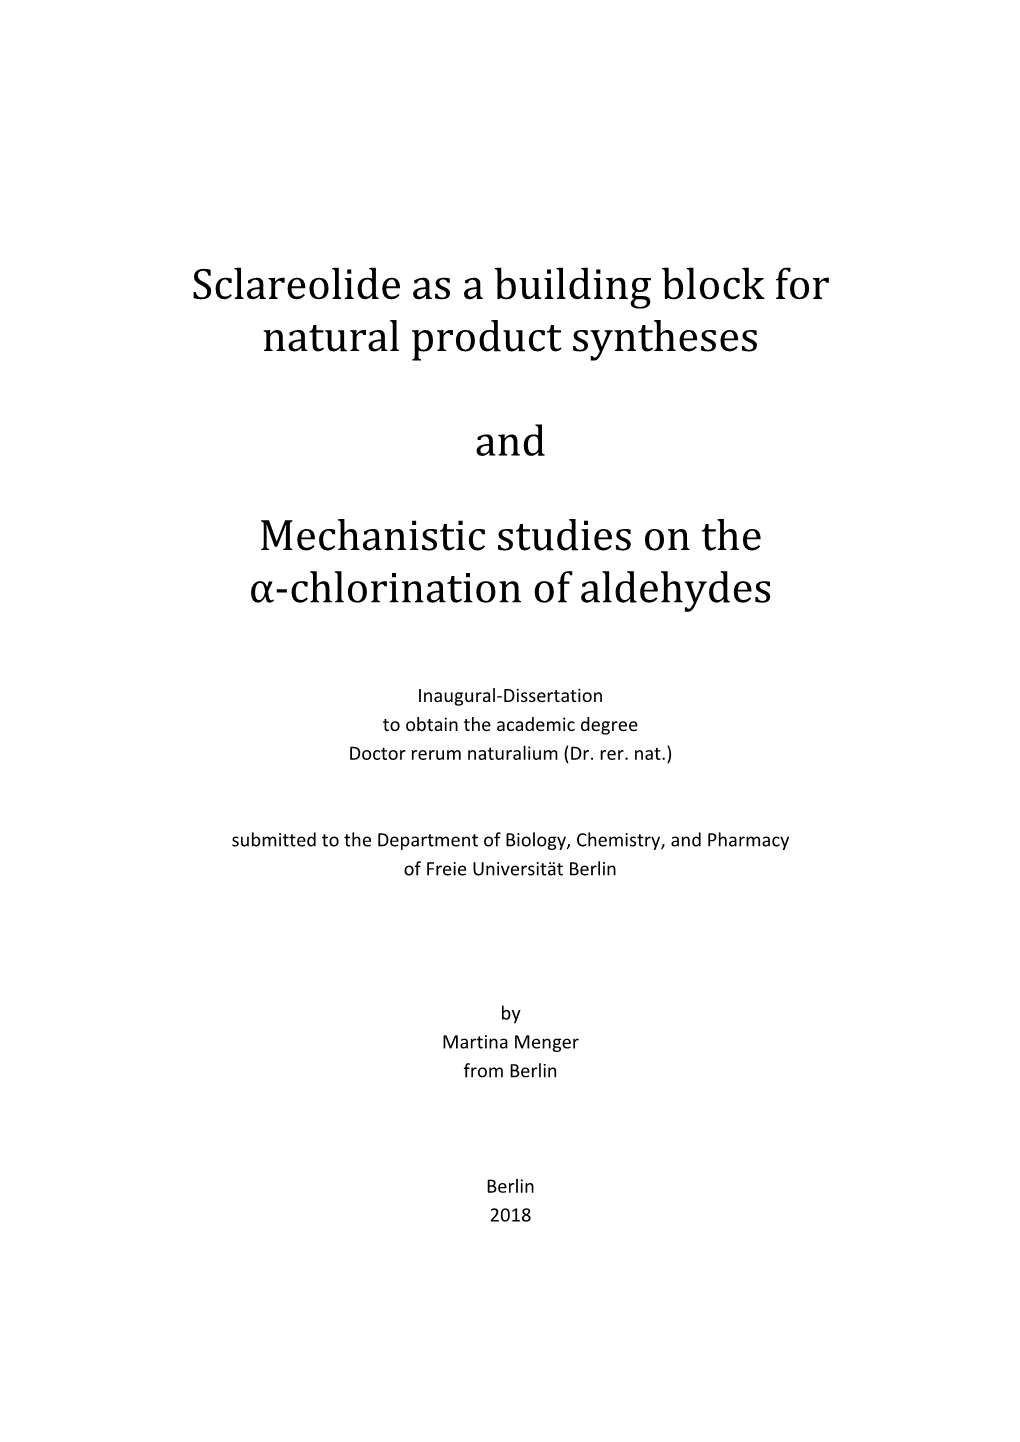 Sclareolide As a Building Block for Natural Product Syntheses And